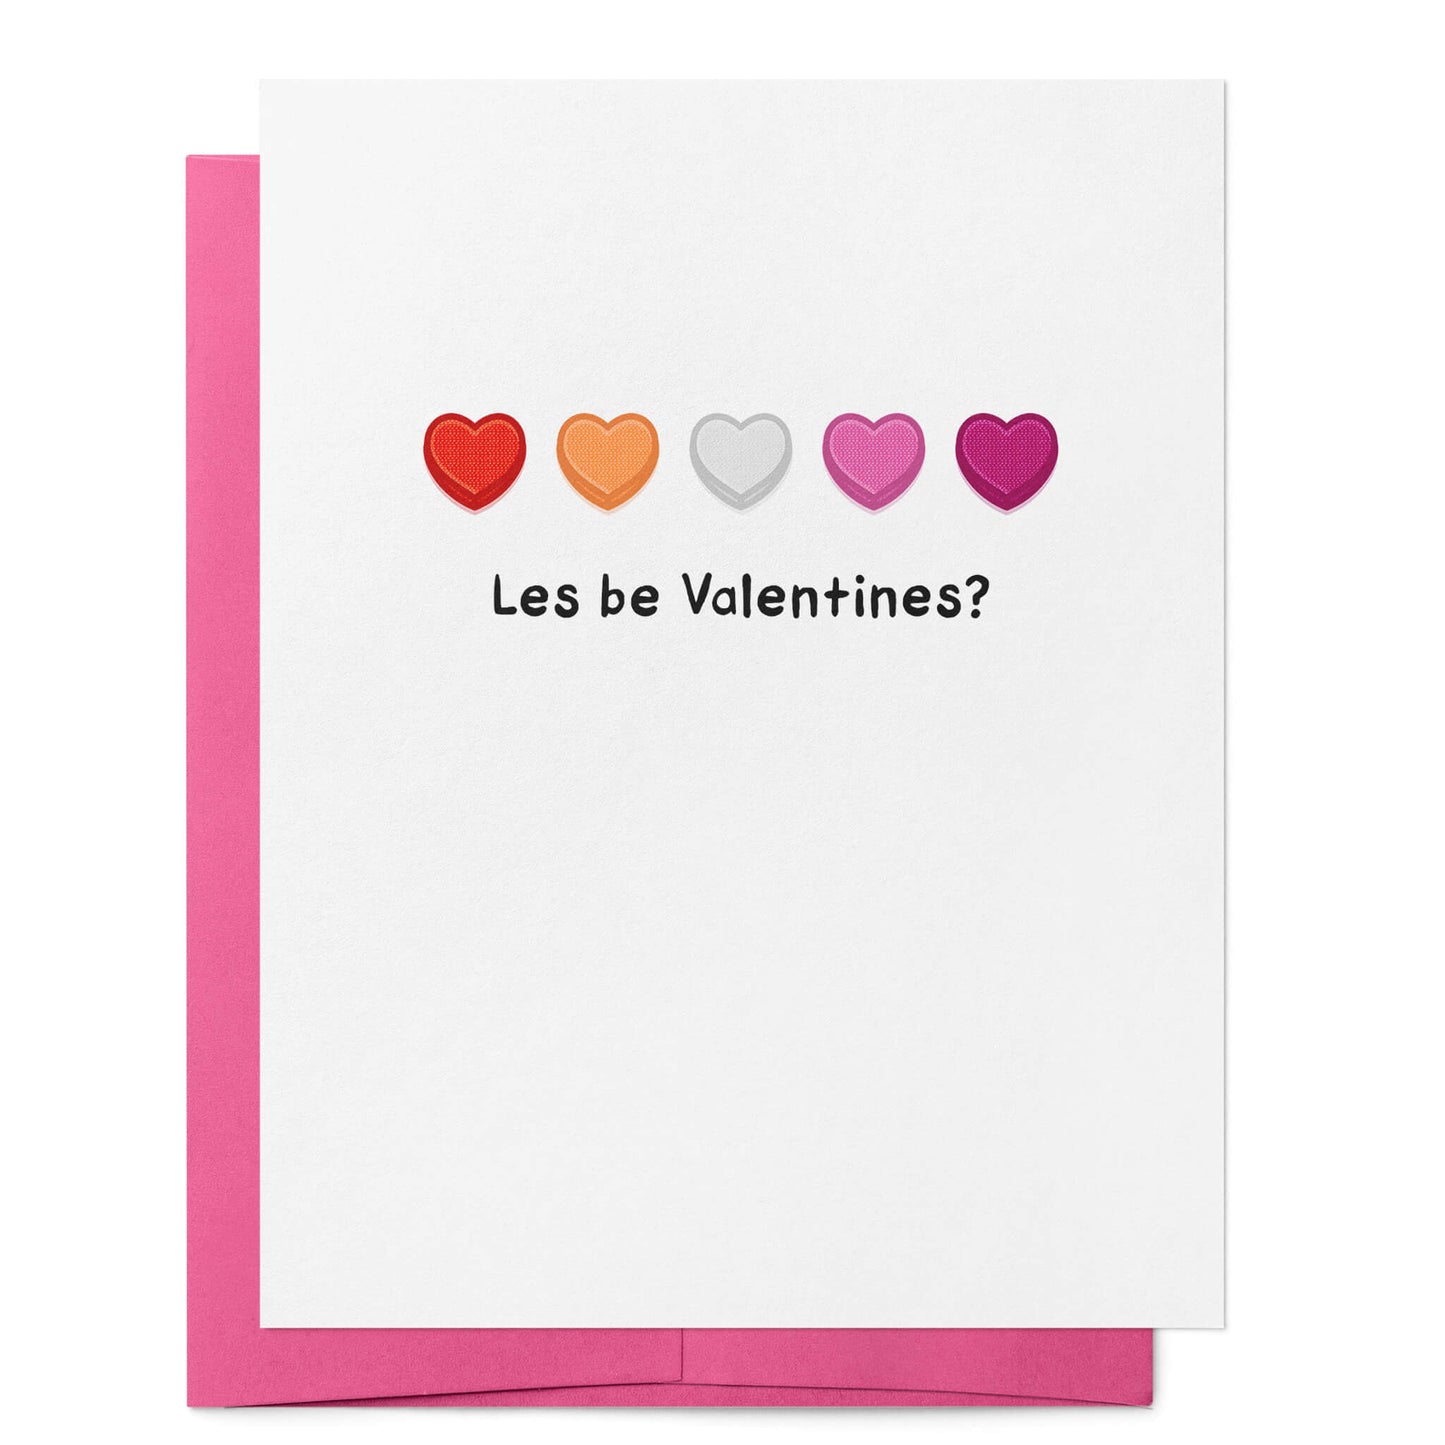 Card: Les be Valentines?